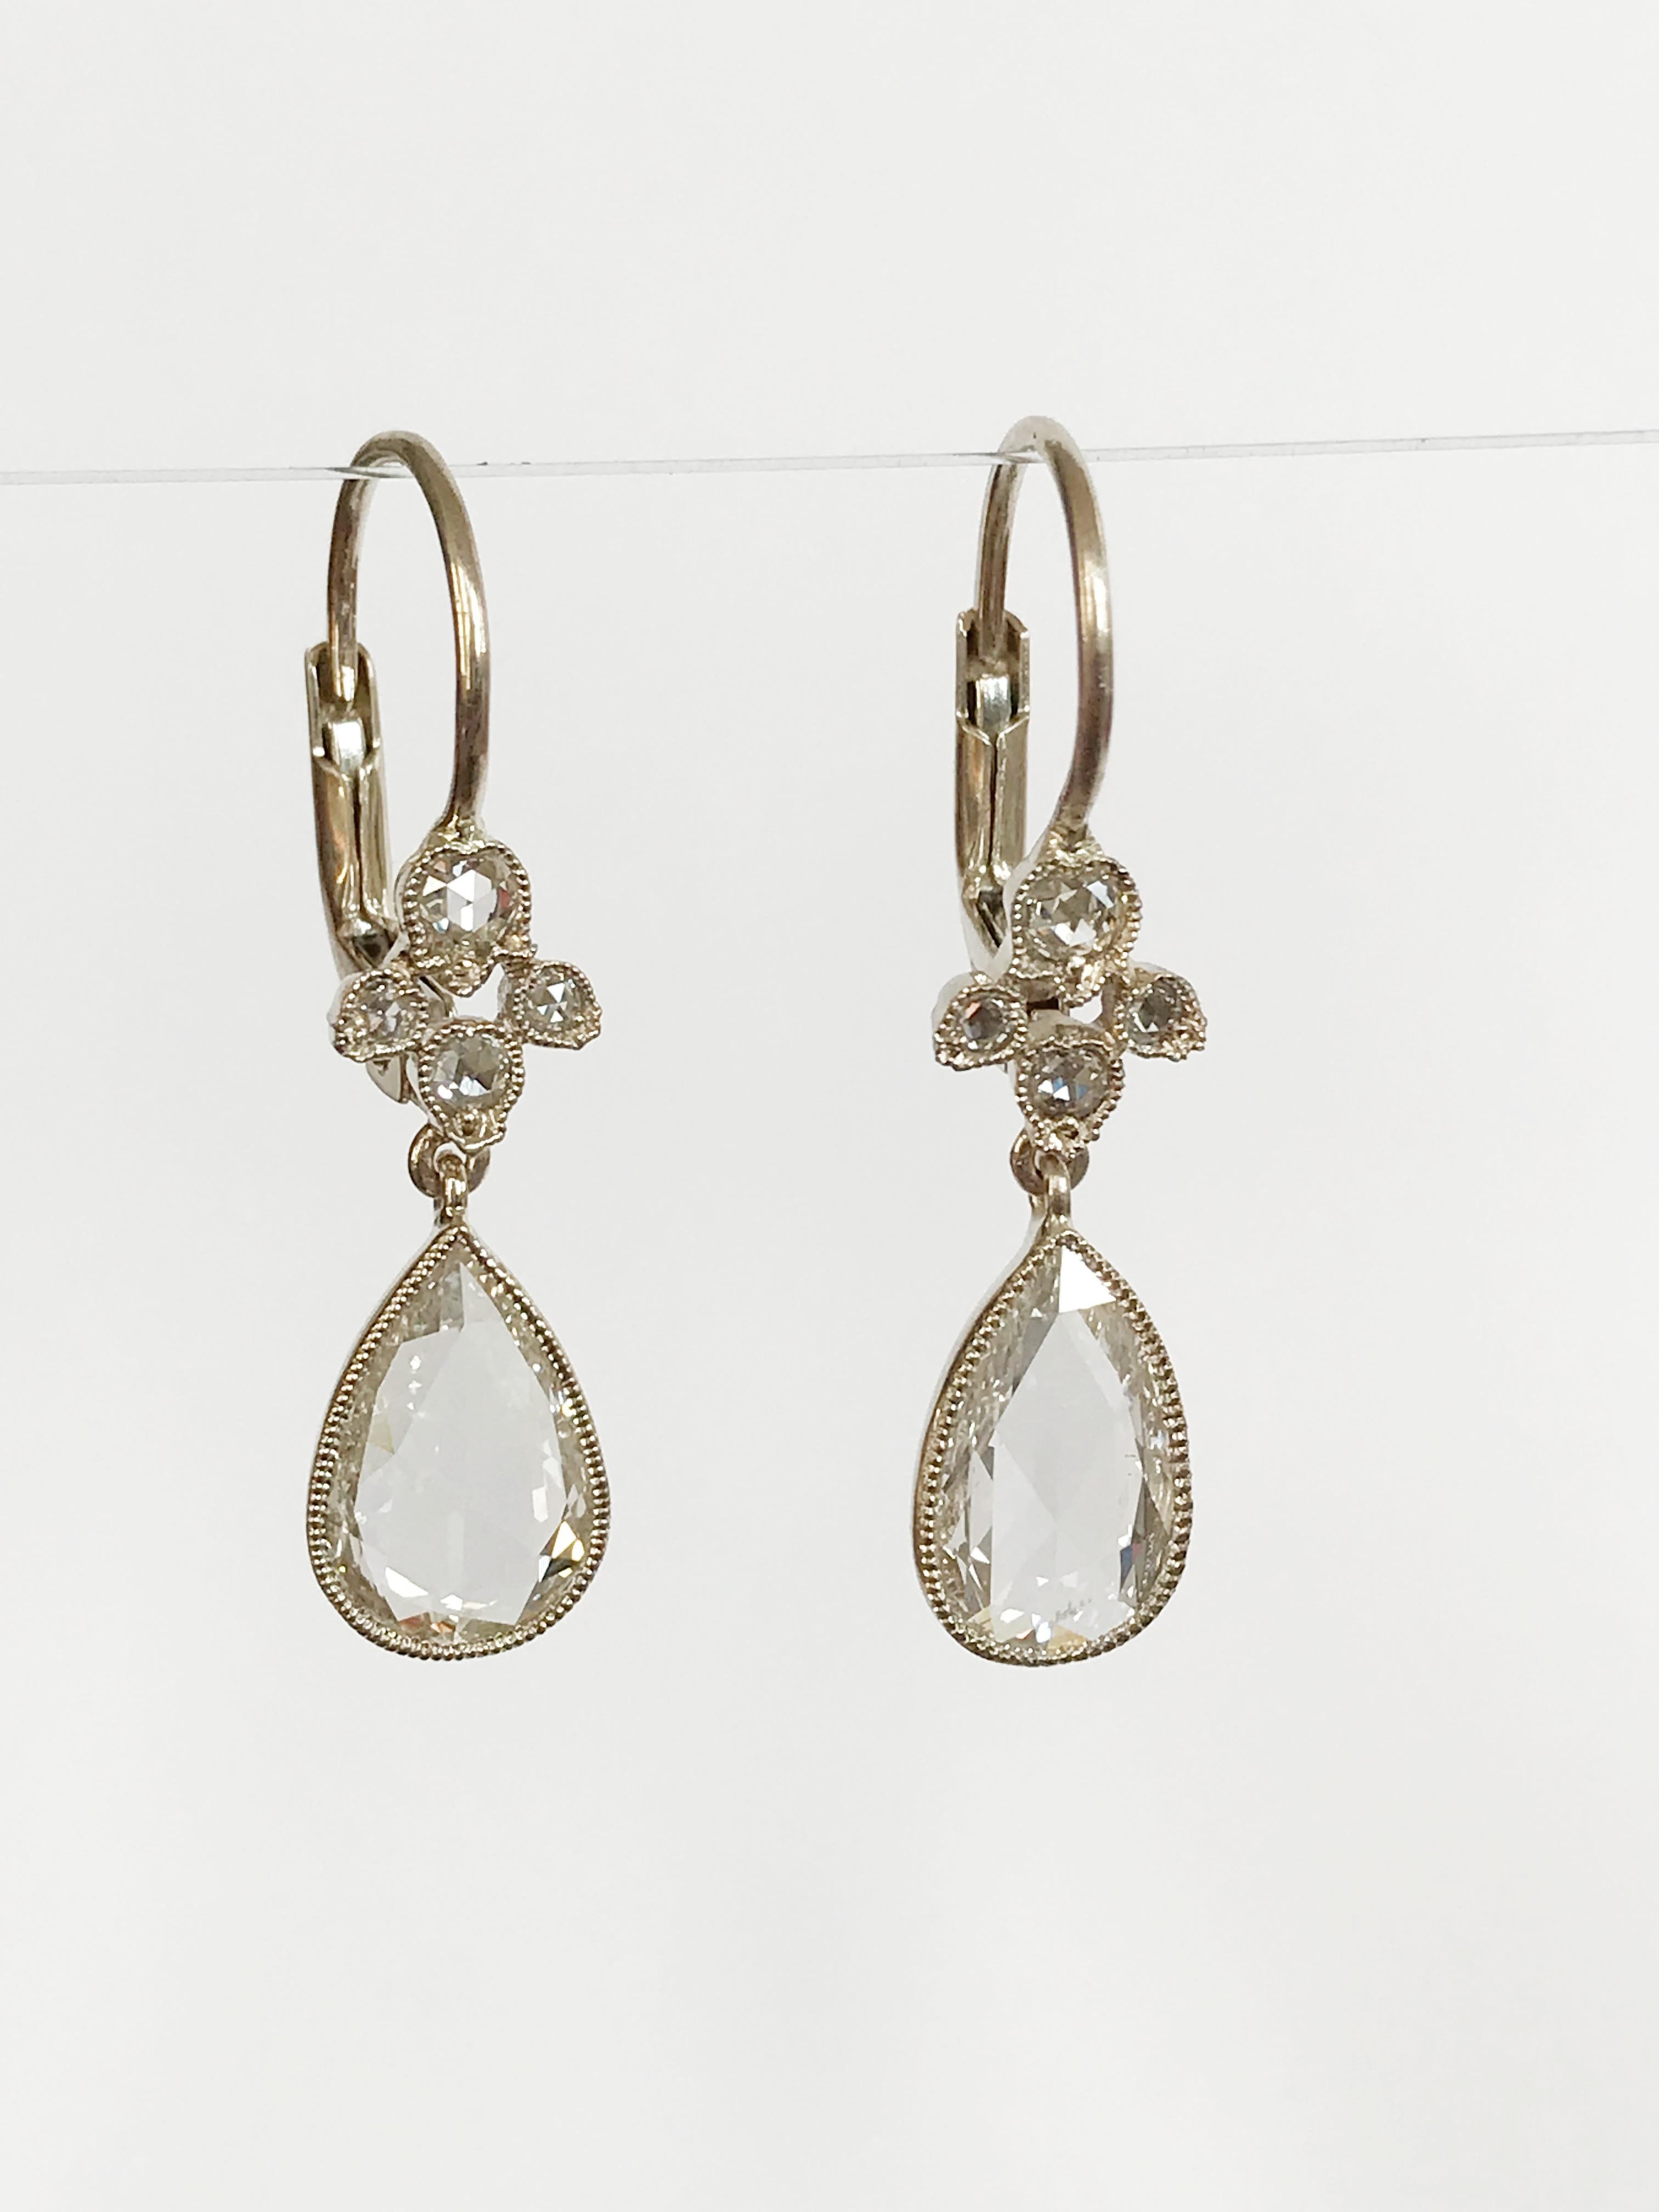 Dalben design One of a Kind 18k white gold earrings with two  bezel-set pear shape rose cut diamonds weigh  1,18 carat and a floral motif  with rose cut diamonds weigh 0,16 carat.
The stone setting is finished with 